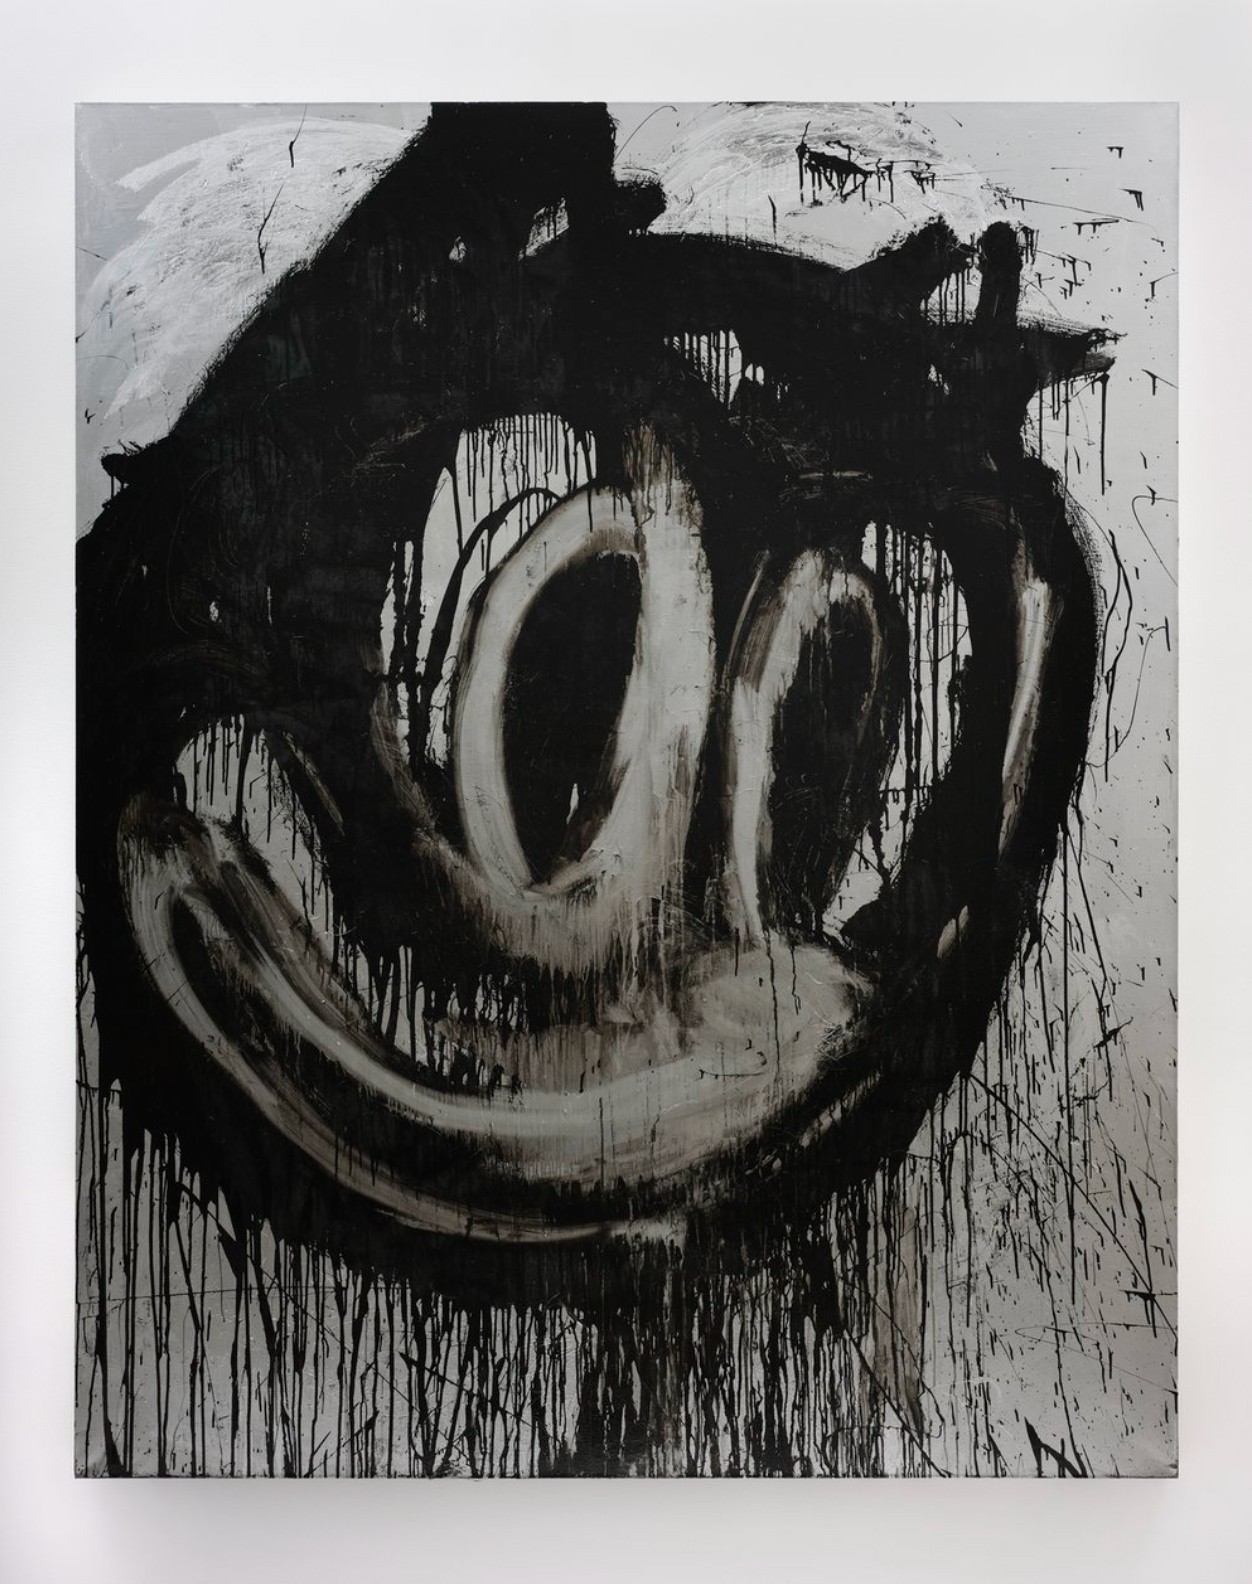 Joyce Pensato, I must Be Dreamin’, 2007. Enamel on linen. 90 x 72 x 1 ½ in. © Joyce Pensato; Courtesy Lisson Gallery. Photography by Mark Waldhauser. On view at The Church